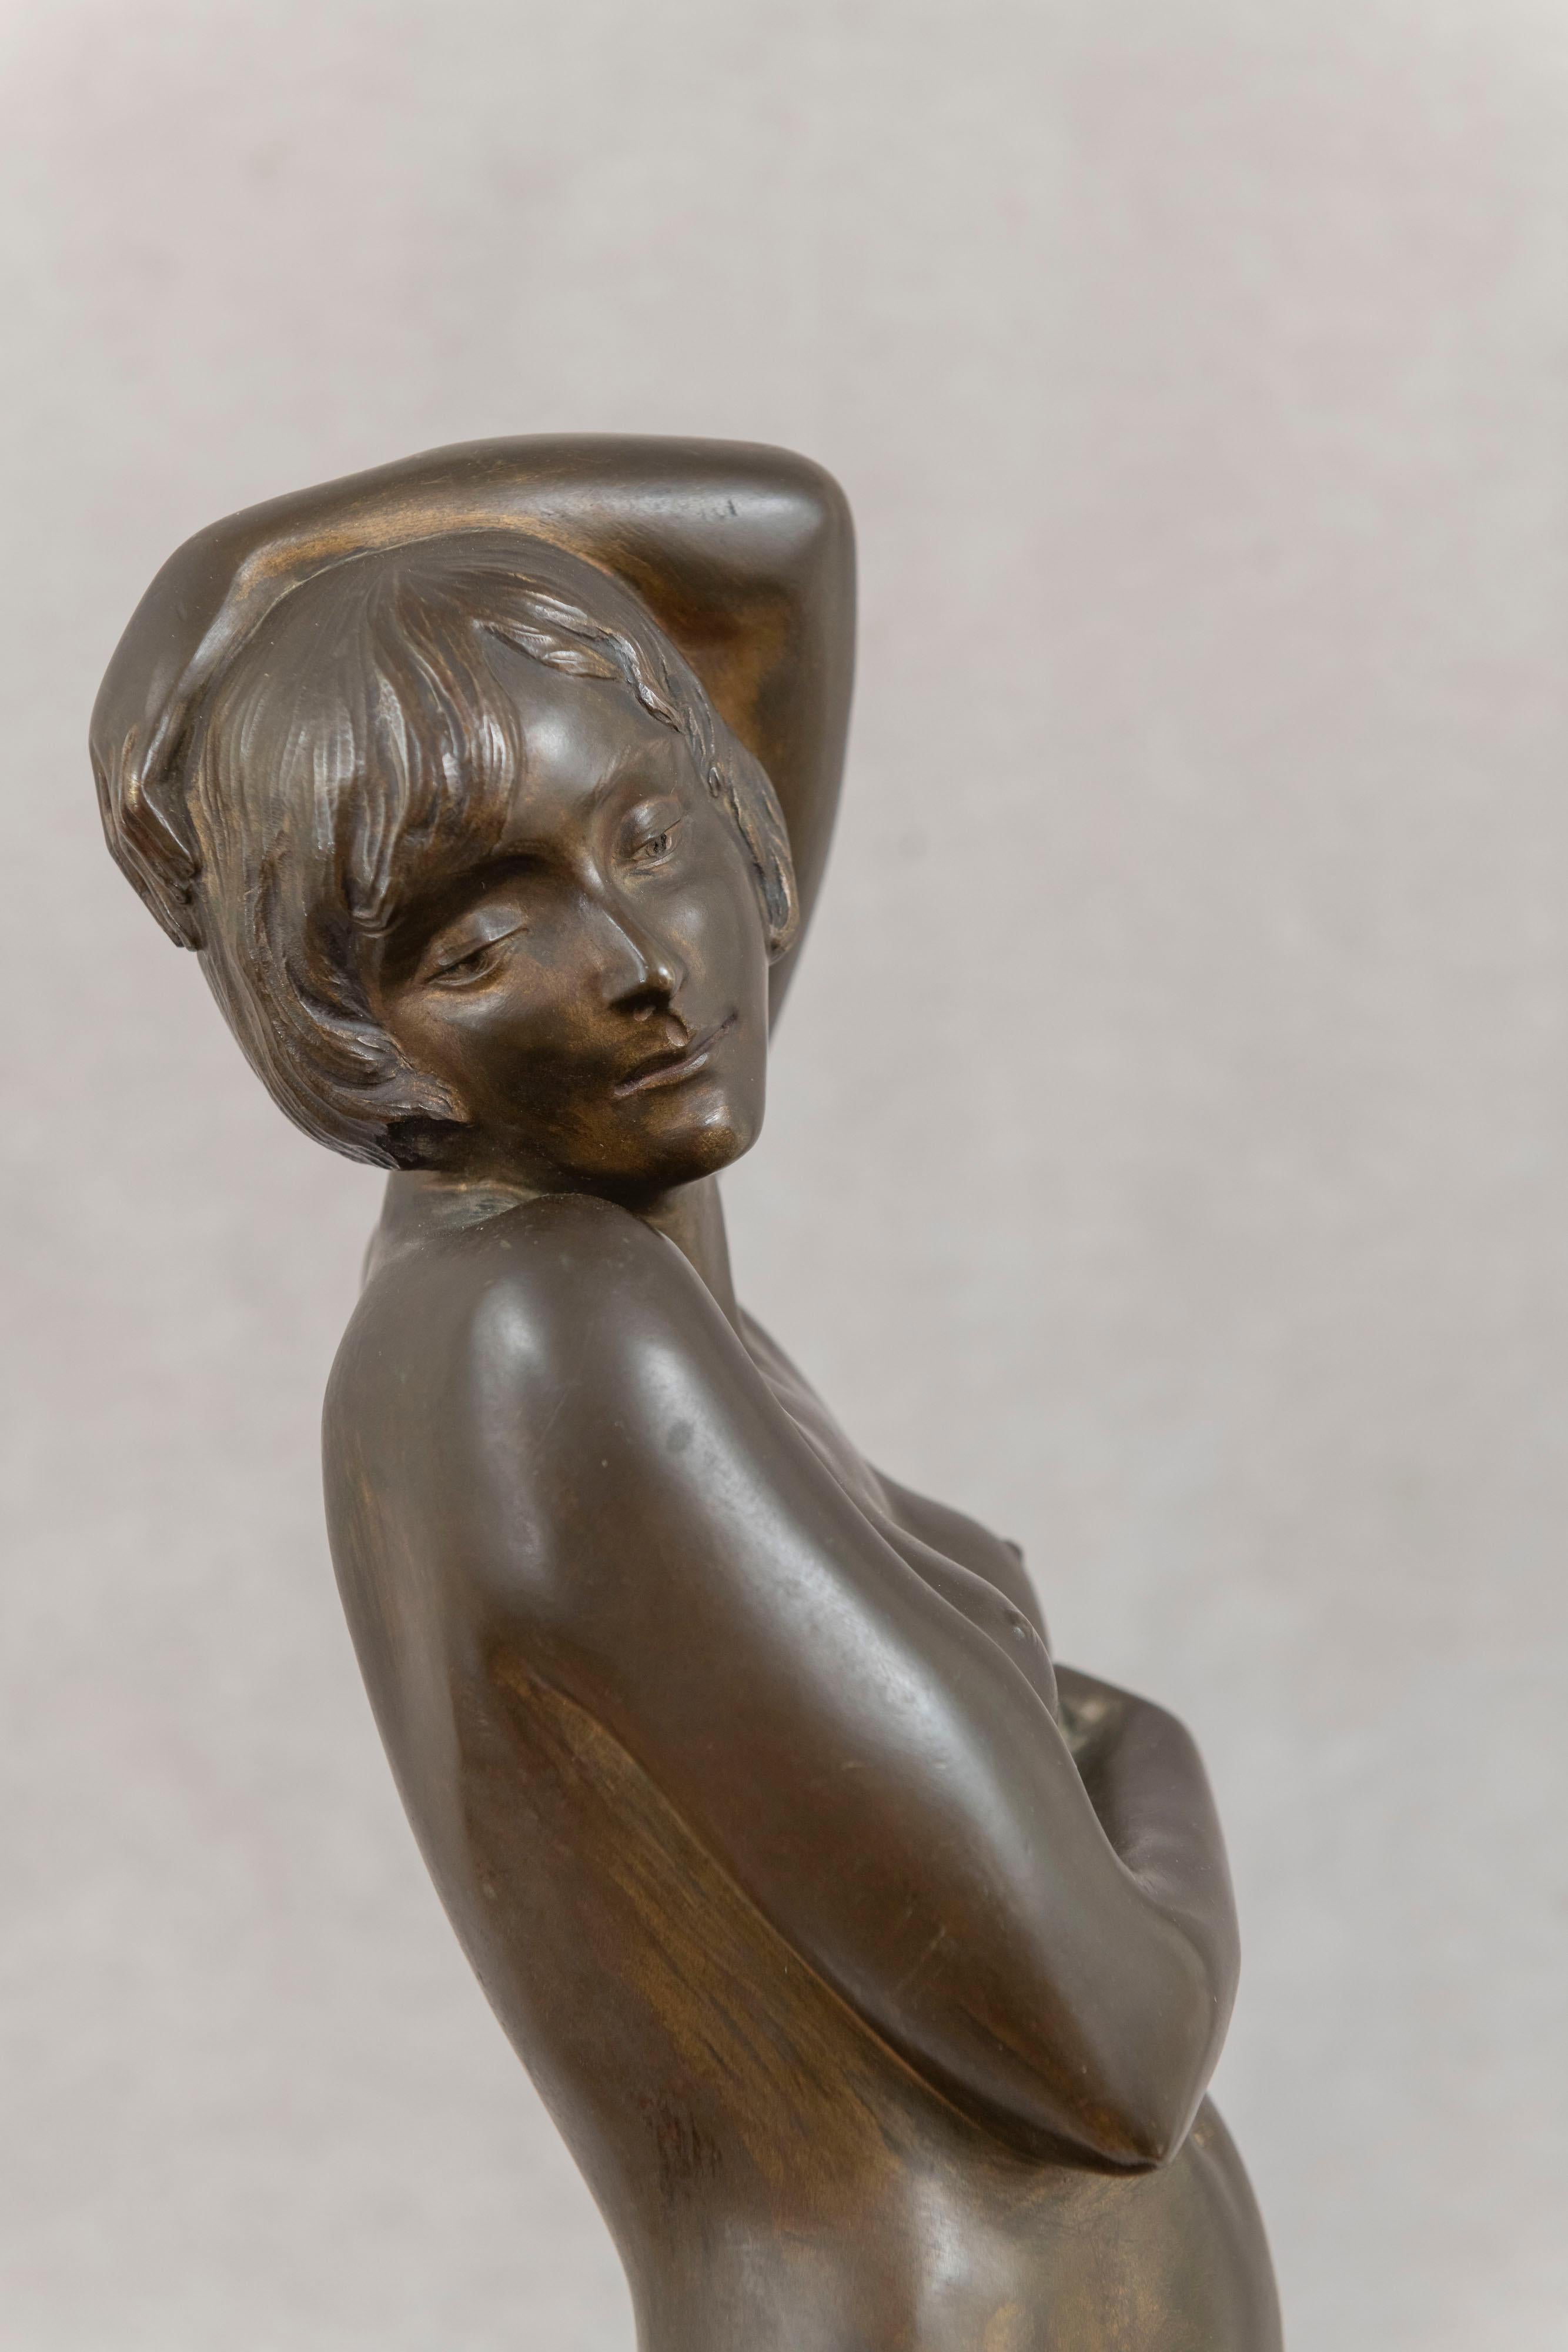 This large and impressive bronze nude is high style art deco. This is not your typical fare. Her pose suggests great vibrancy and sexuality. While unsigned we know it was done by Marie Louise Simard. To appreciate the full value of this sculpture,